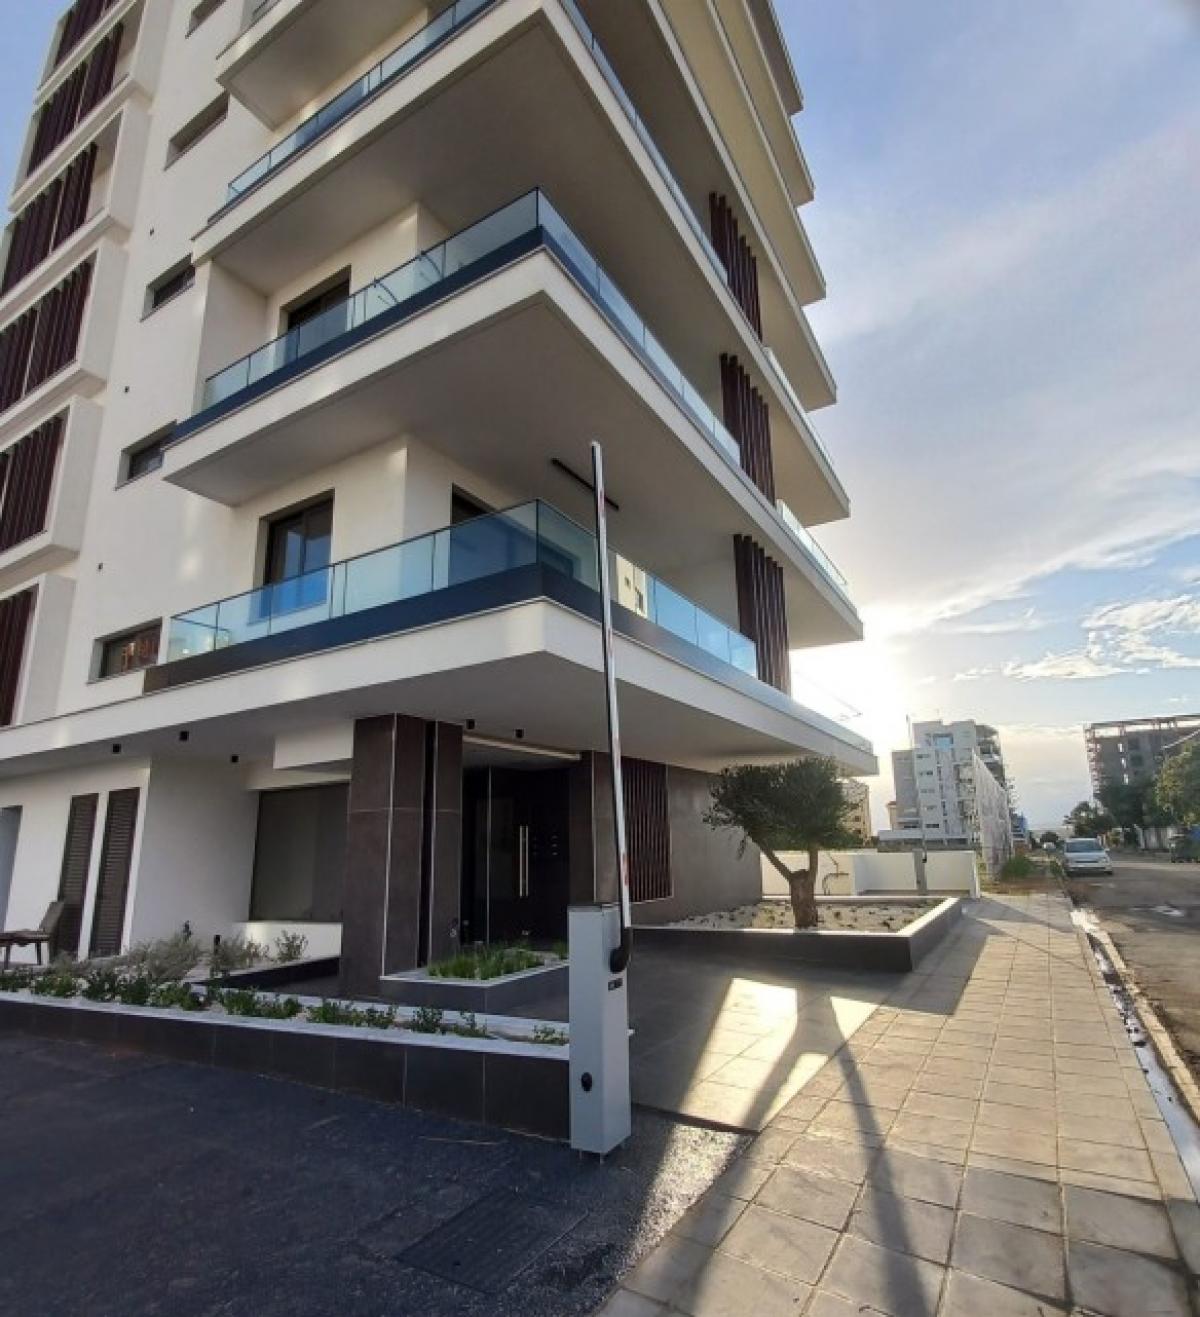 Picture of Home For Sale in Larnaka - Makenzy, Larnaca, Cyprus